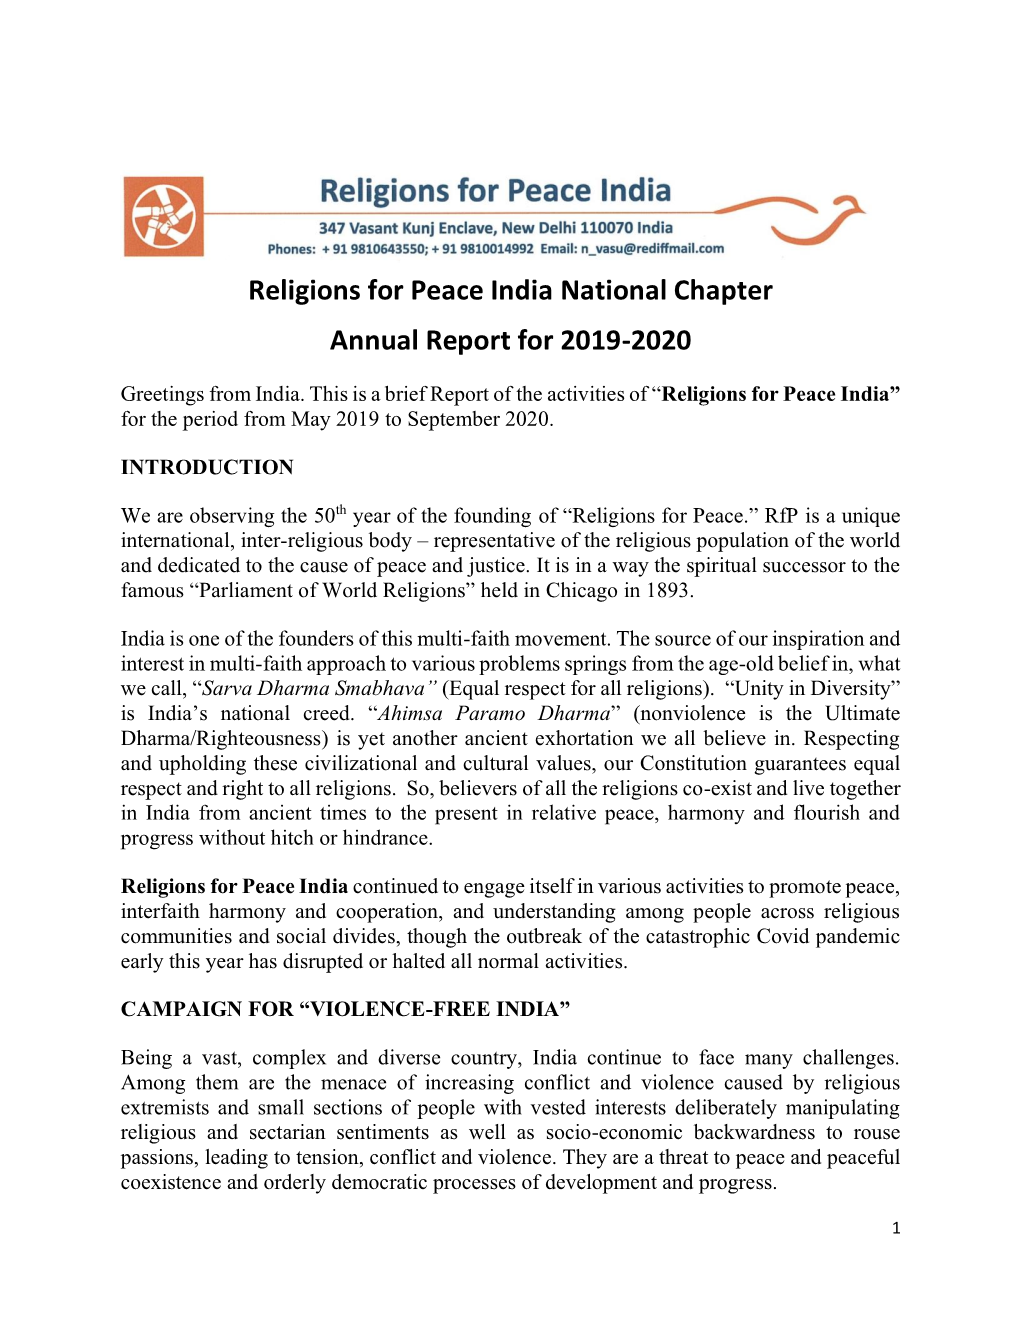 Religions for Peace India National Chapter Annual Report for 2019-2020